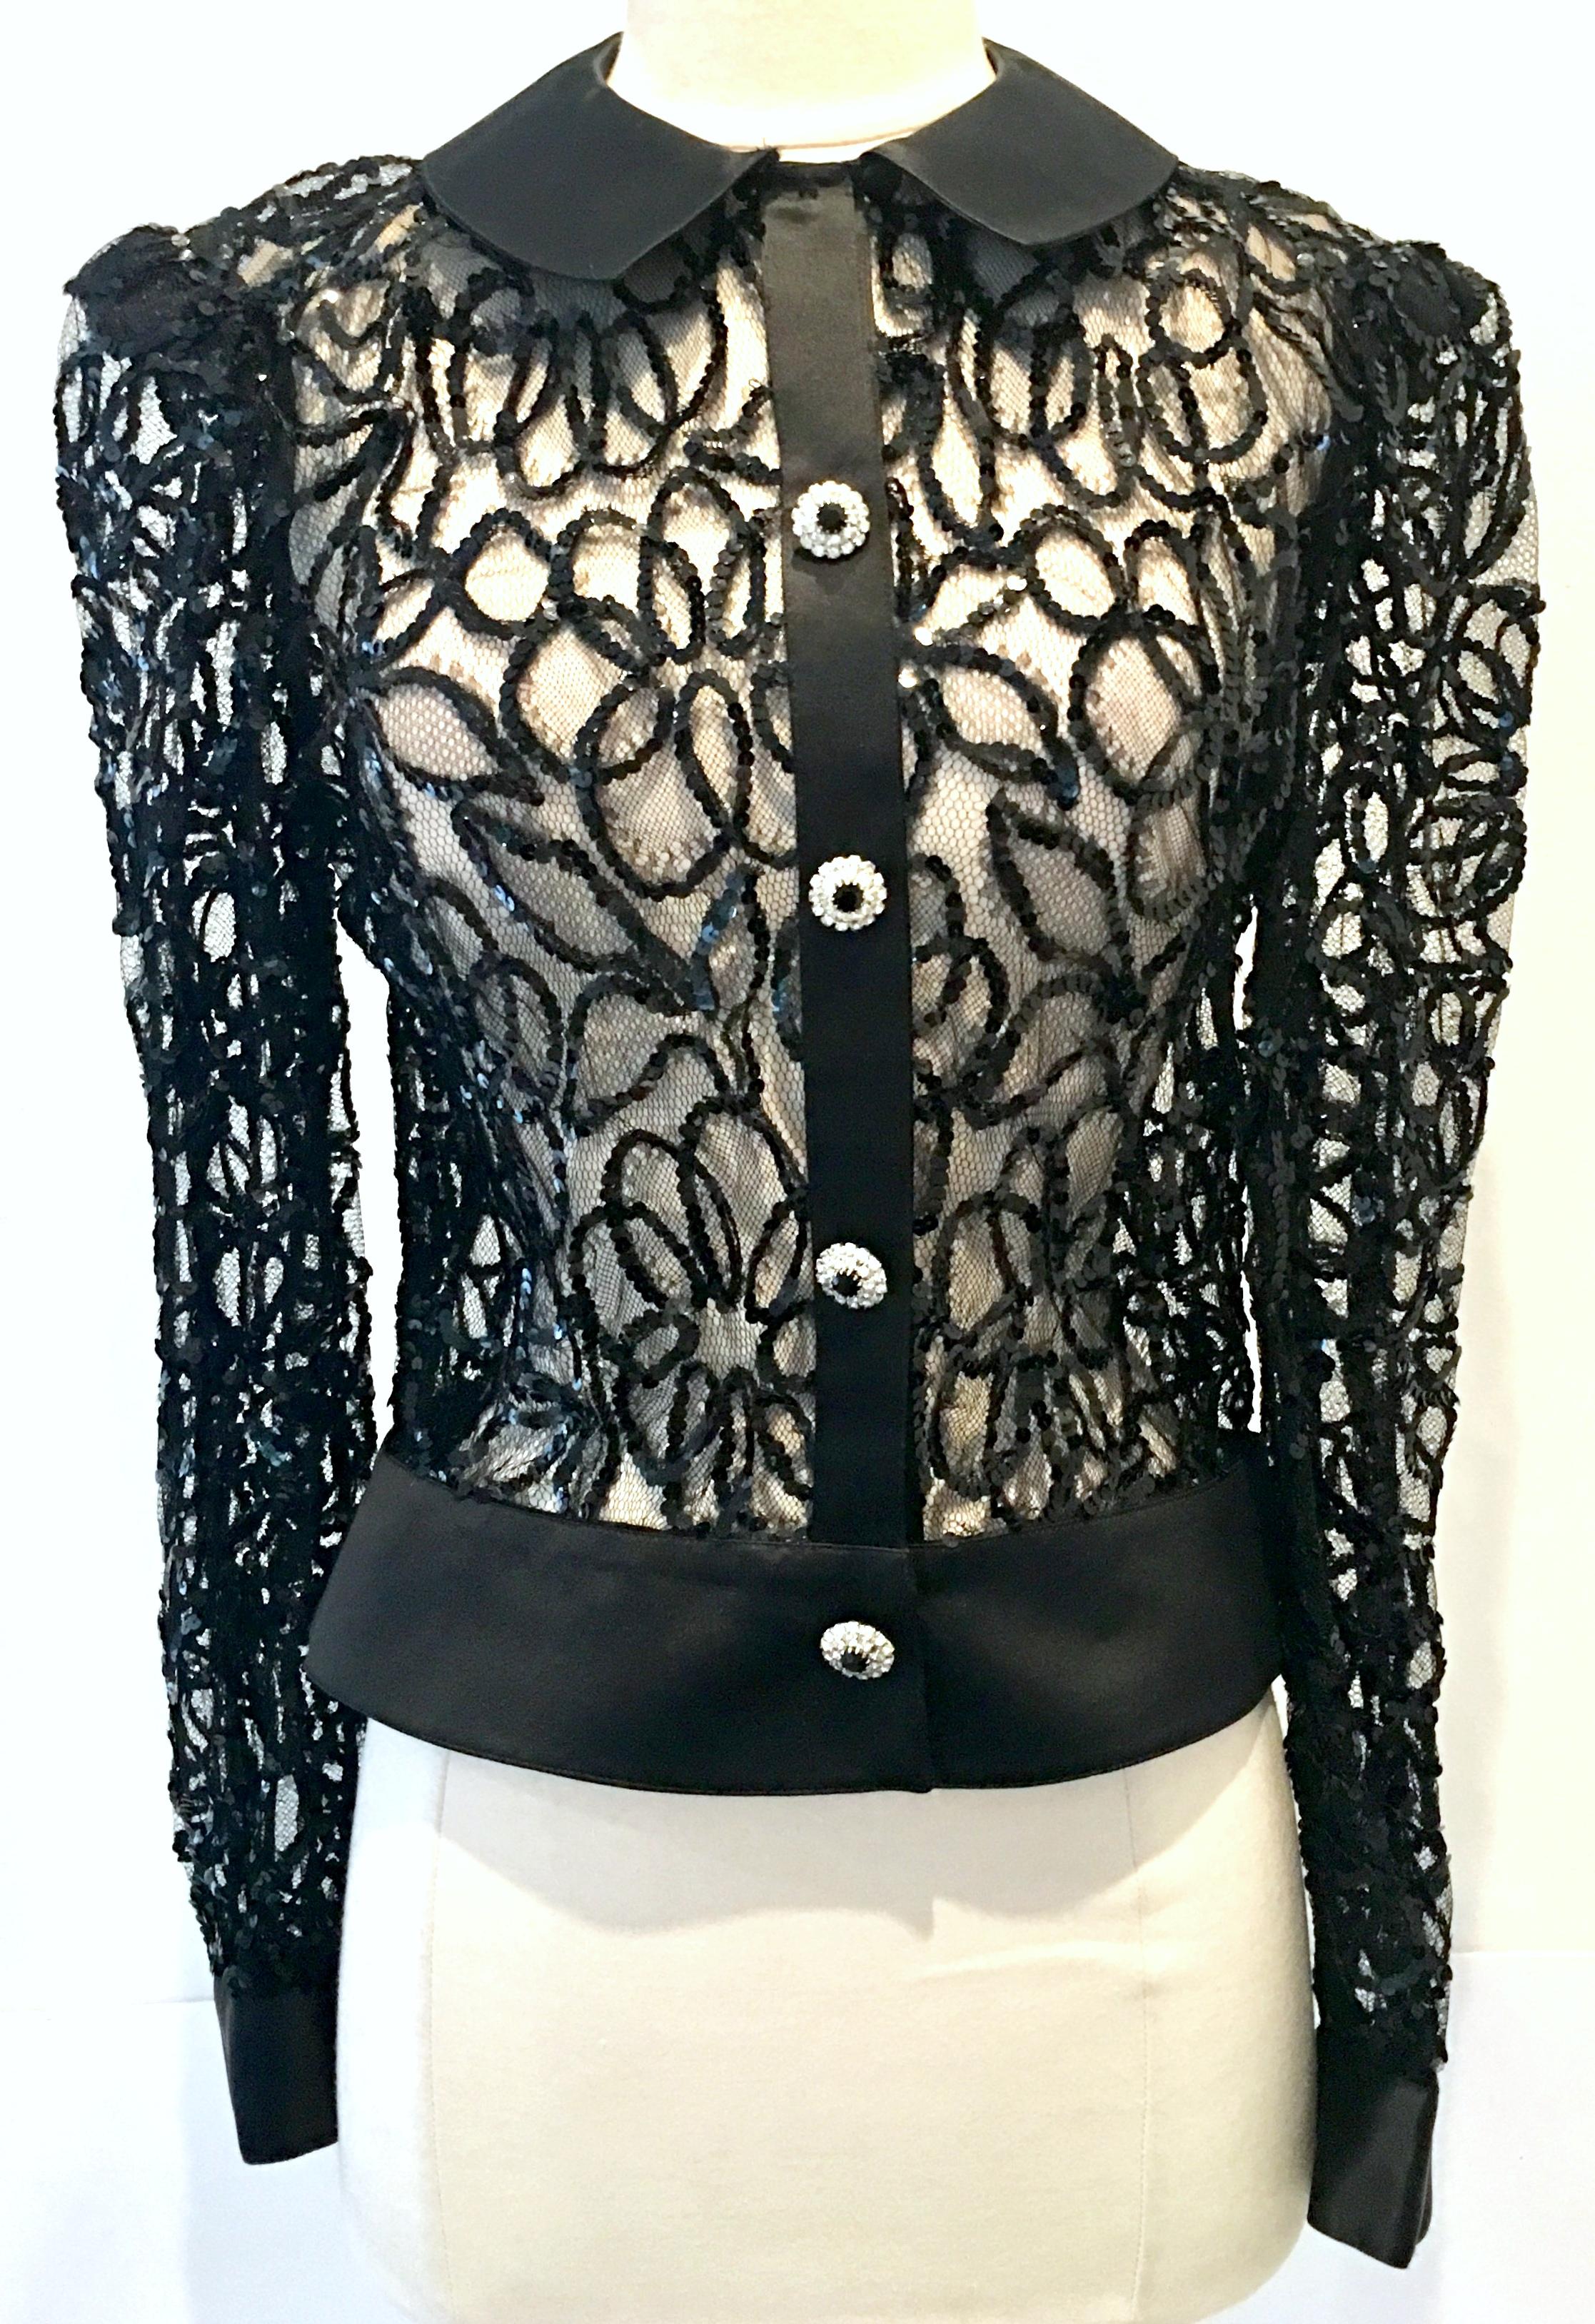 20th Century Black Lace, Satin, Sequin & Swarovksi Crystal Rhinestone Evening Blouse - Jacket ( Blouson) By, Adolfo New York. This very finely crafted classic collectible piece is a classic and dramatic staple for any wardrobe. Executed in the